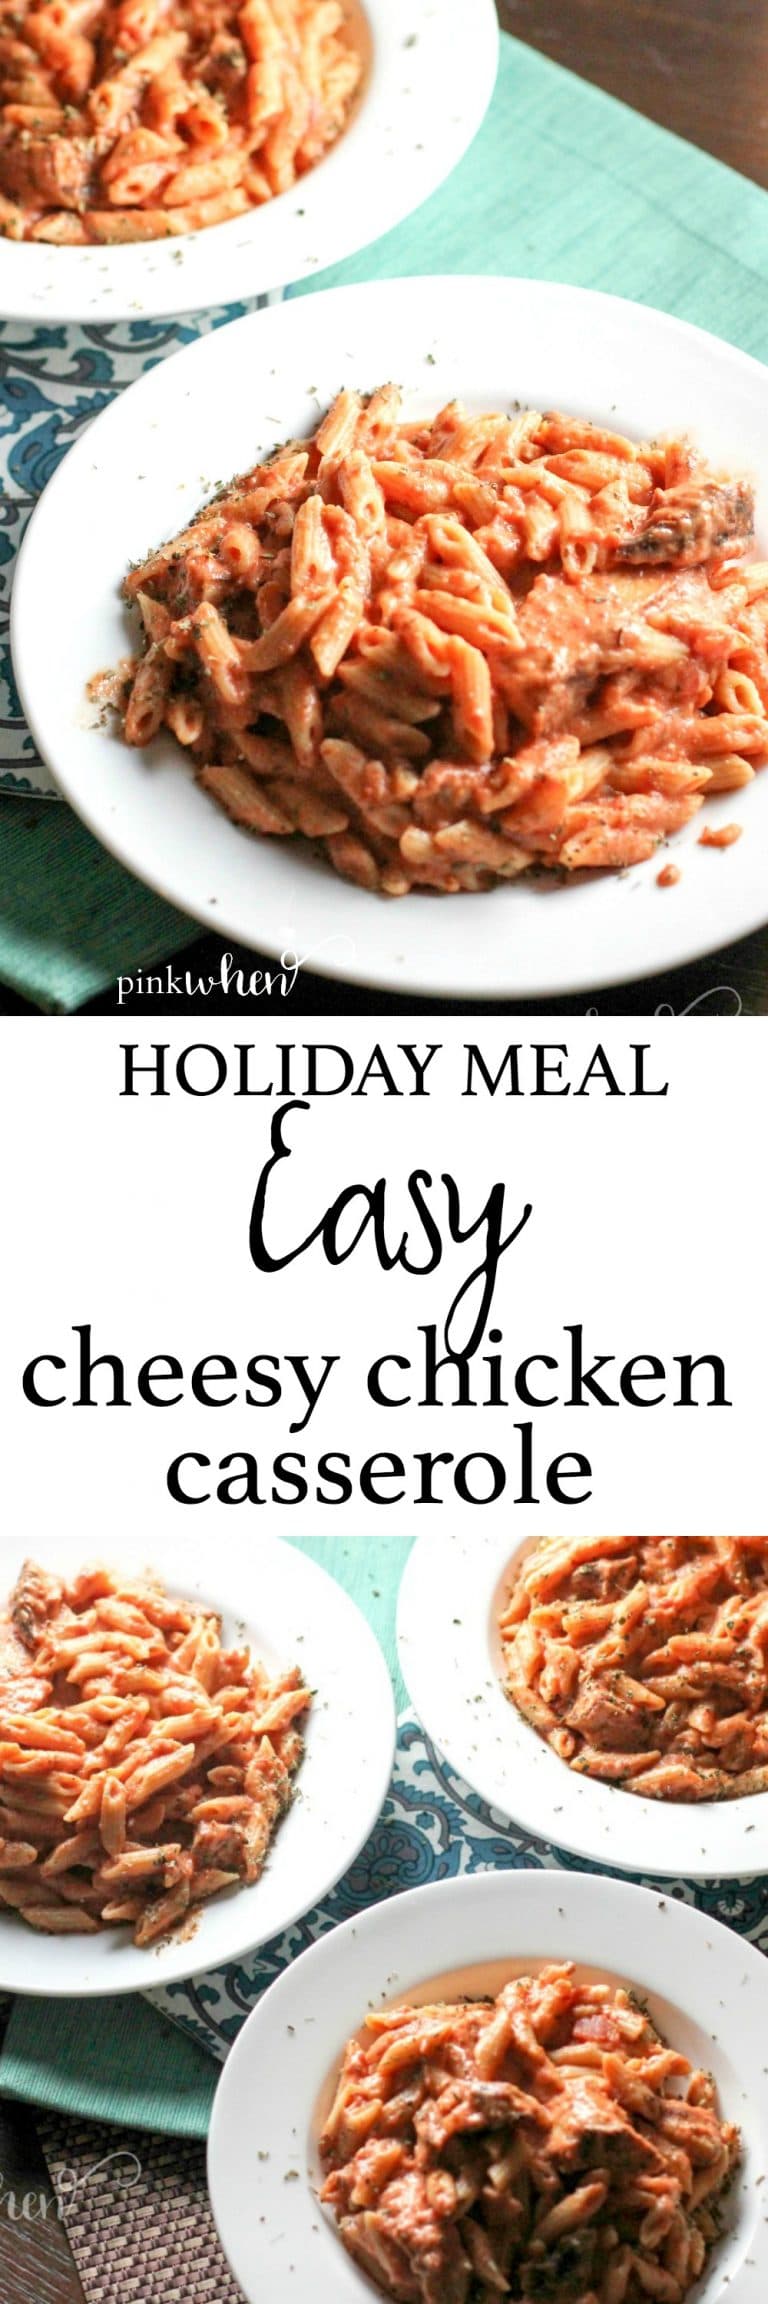  This easy cheesy chicken casserole is an easy weeknight dish, and you can never have too many easy weeknight dishes.  Am I right? Just a little penne, some traditional marinara sauce, and lots of delicious cheese make this dish a hit for the whole family. I must say that the best part of back to school this year has been the fact that I have found so many easy weeknight meals.  With my husband and myself both traveling more with our jobs, it has been insane trying to get things organized at night.  I have made sure that above all else, I have an easy weeknight meal planned. Easy Cheesy Chicken Casserole I guess in an ideal world I would be meal planning over the weekend, but a simple dinner dish like this one doesn't require much planning ahead.  As long as I have my few ingredients on hand, I know I can share a delicious meal the whole family will enjoy. To make this easy cheesy chicken casserole you only need a few ingredients on hand: Barilla Penne Pasta Barilla Red Sauce Galbani Mozzarella Galbani Ricotta Cooked Shredded chicken salt, pepper, oregano to taste Normally I love a good casserole that I can place in the oven, but since I use cooked chicken breast in this dish, I don't even have to wait for the oven to warm up. Easy Cheesy Chicken Casserole To get started, I boil the water to get my pasta all good and al dente.  After I have drained out the water, I lower the stovetop temp and add in 2 jars of the Barilla red sauce.  Stirring constantly. Once the red sauce and pasta are mixed completely, I then add 3 Tablespoons of Ricotta and 1/4 cup of Mozzarella.  Allow these to melt together, and then add the cooked chicken last. I will then cover and cook for 15 minutes to allow all of the cheeses, sauce, and chicken time to melt together. I also like to add a little salt and pepper and oregano to flavor things up a little more. Once everything is melted together, I then turn the stovetop to low and serve the family.  It's such a quick and easy weeknight meal, and it's one the whole family enjoys. Easy Cheesy Chicken Casserole It's funny how our weeknights can fly by, but it is nice to always sit down and have a nice dinner, even if it is a quick one. WHat's your favorite weeknight dinner option?  I hope you will add this easy cheesy chicken casserole to your list of favorite quick recipes.